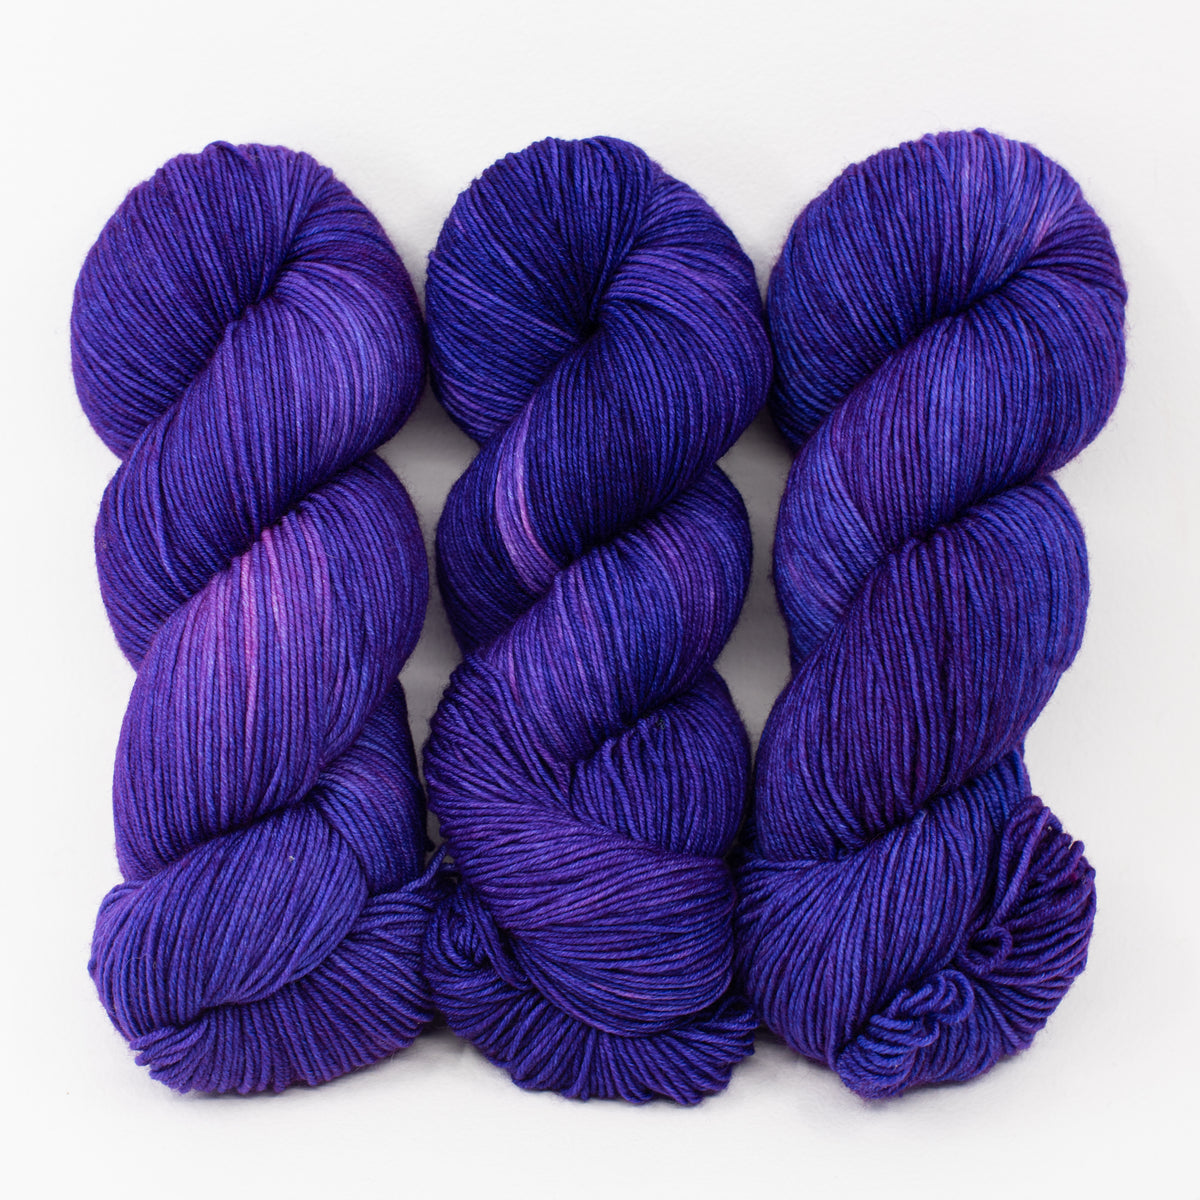 Purple Sequins - Revival Worsted - Dyed Stock